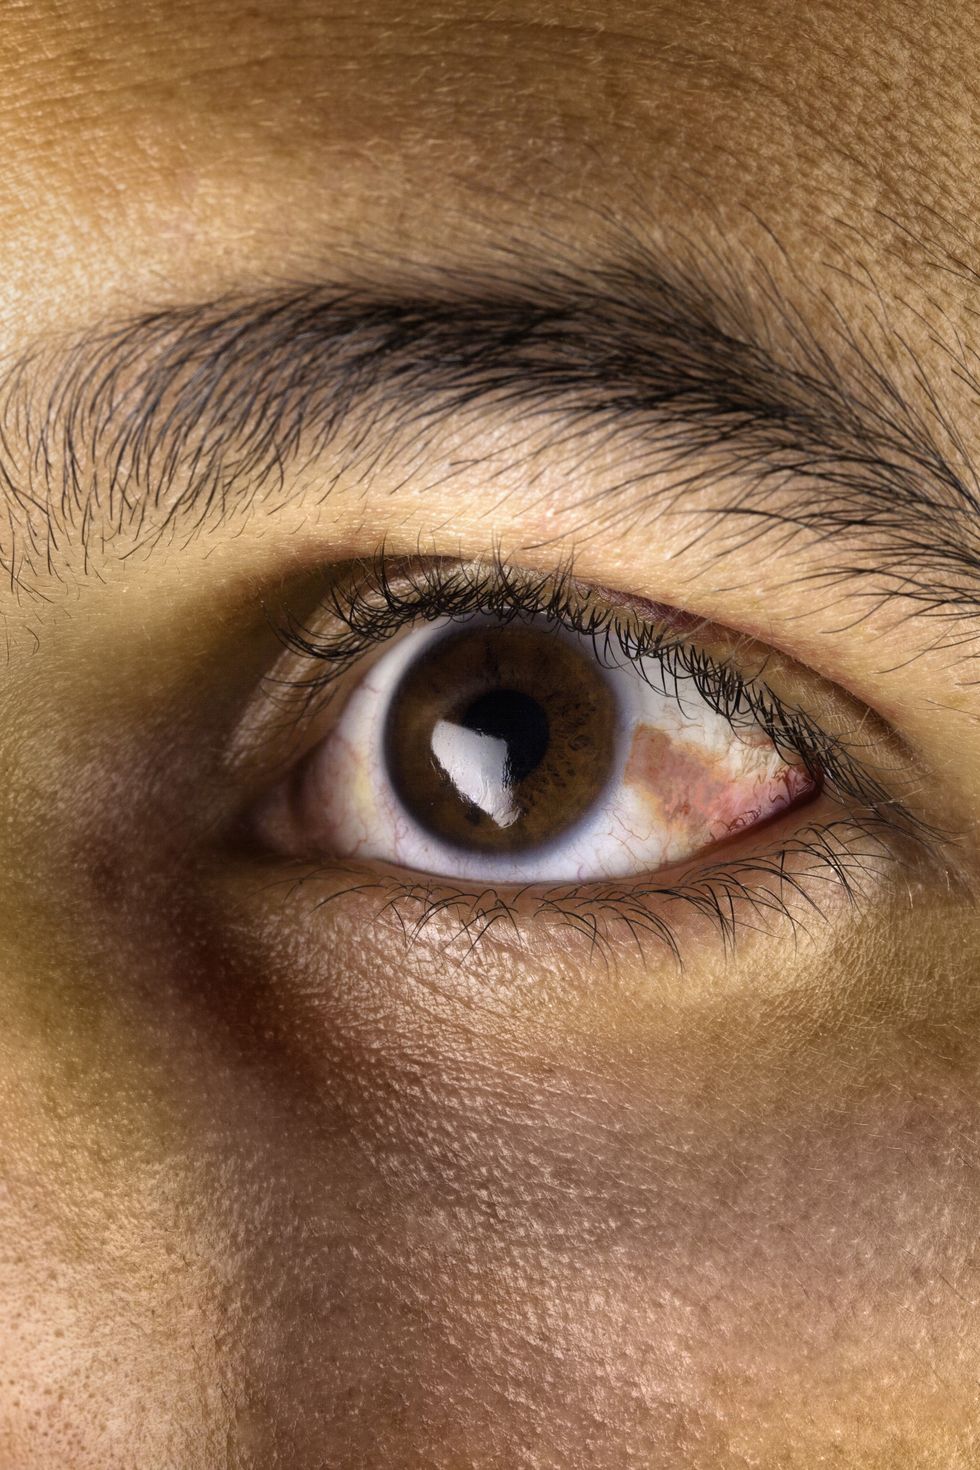 9 things your eyes tell you about your health